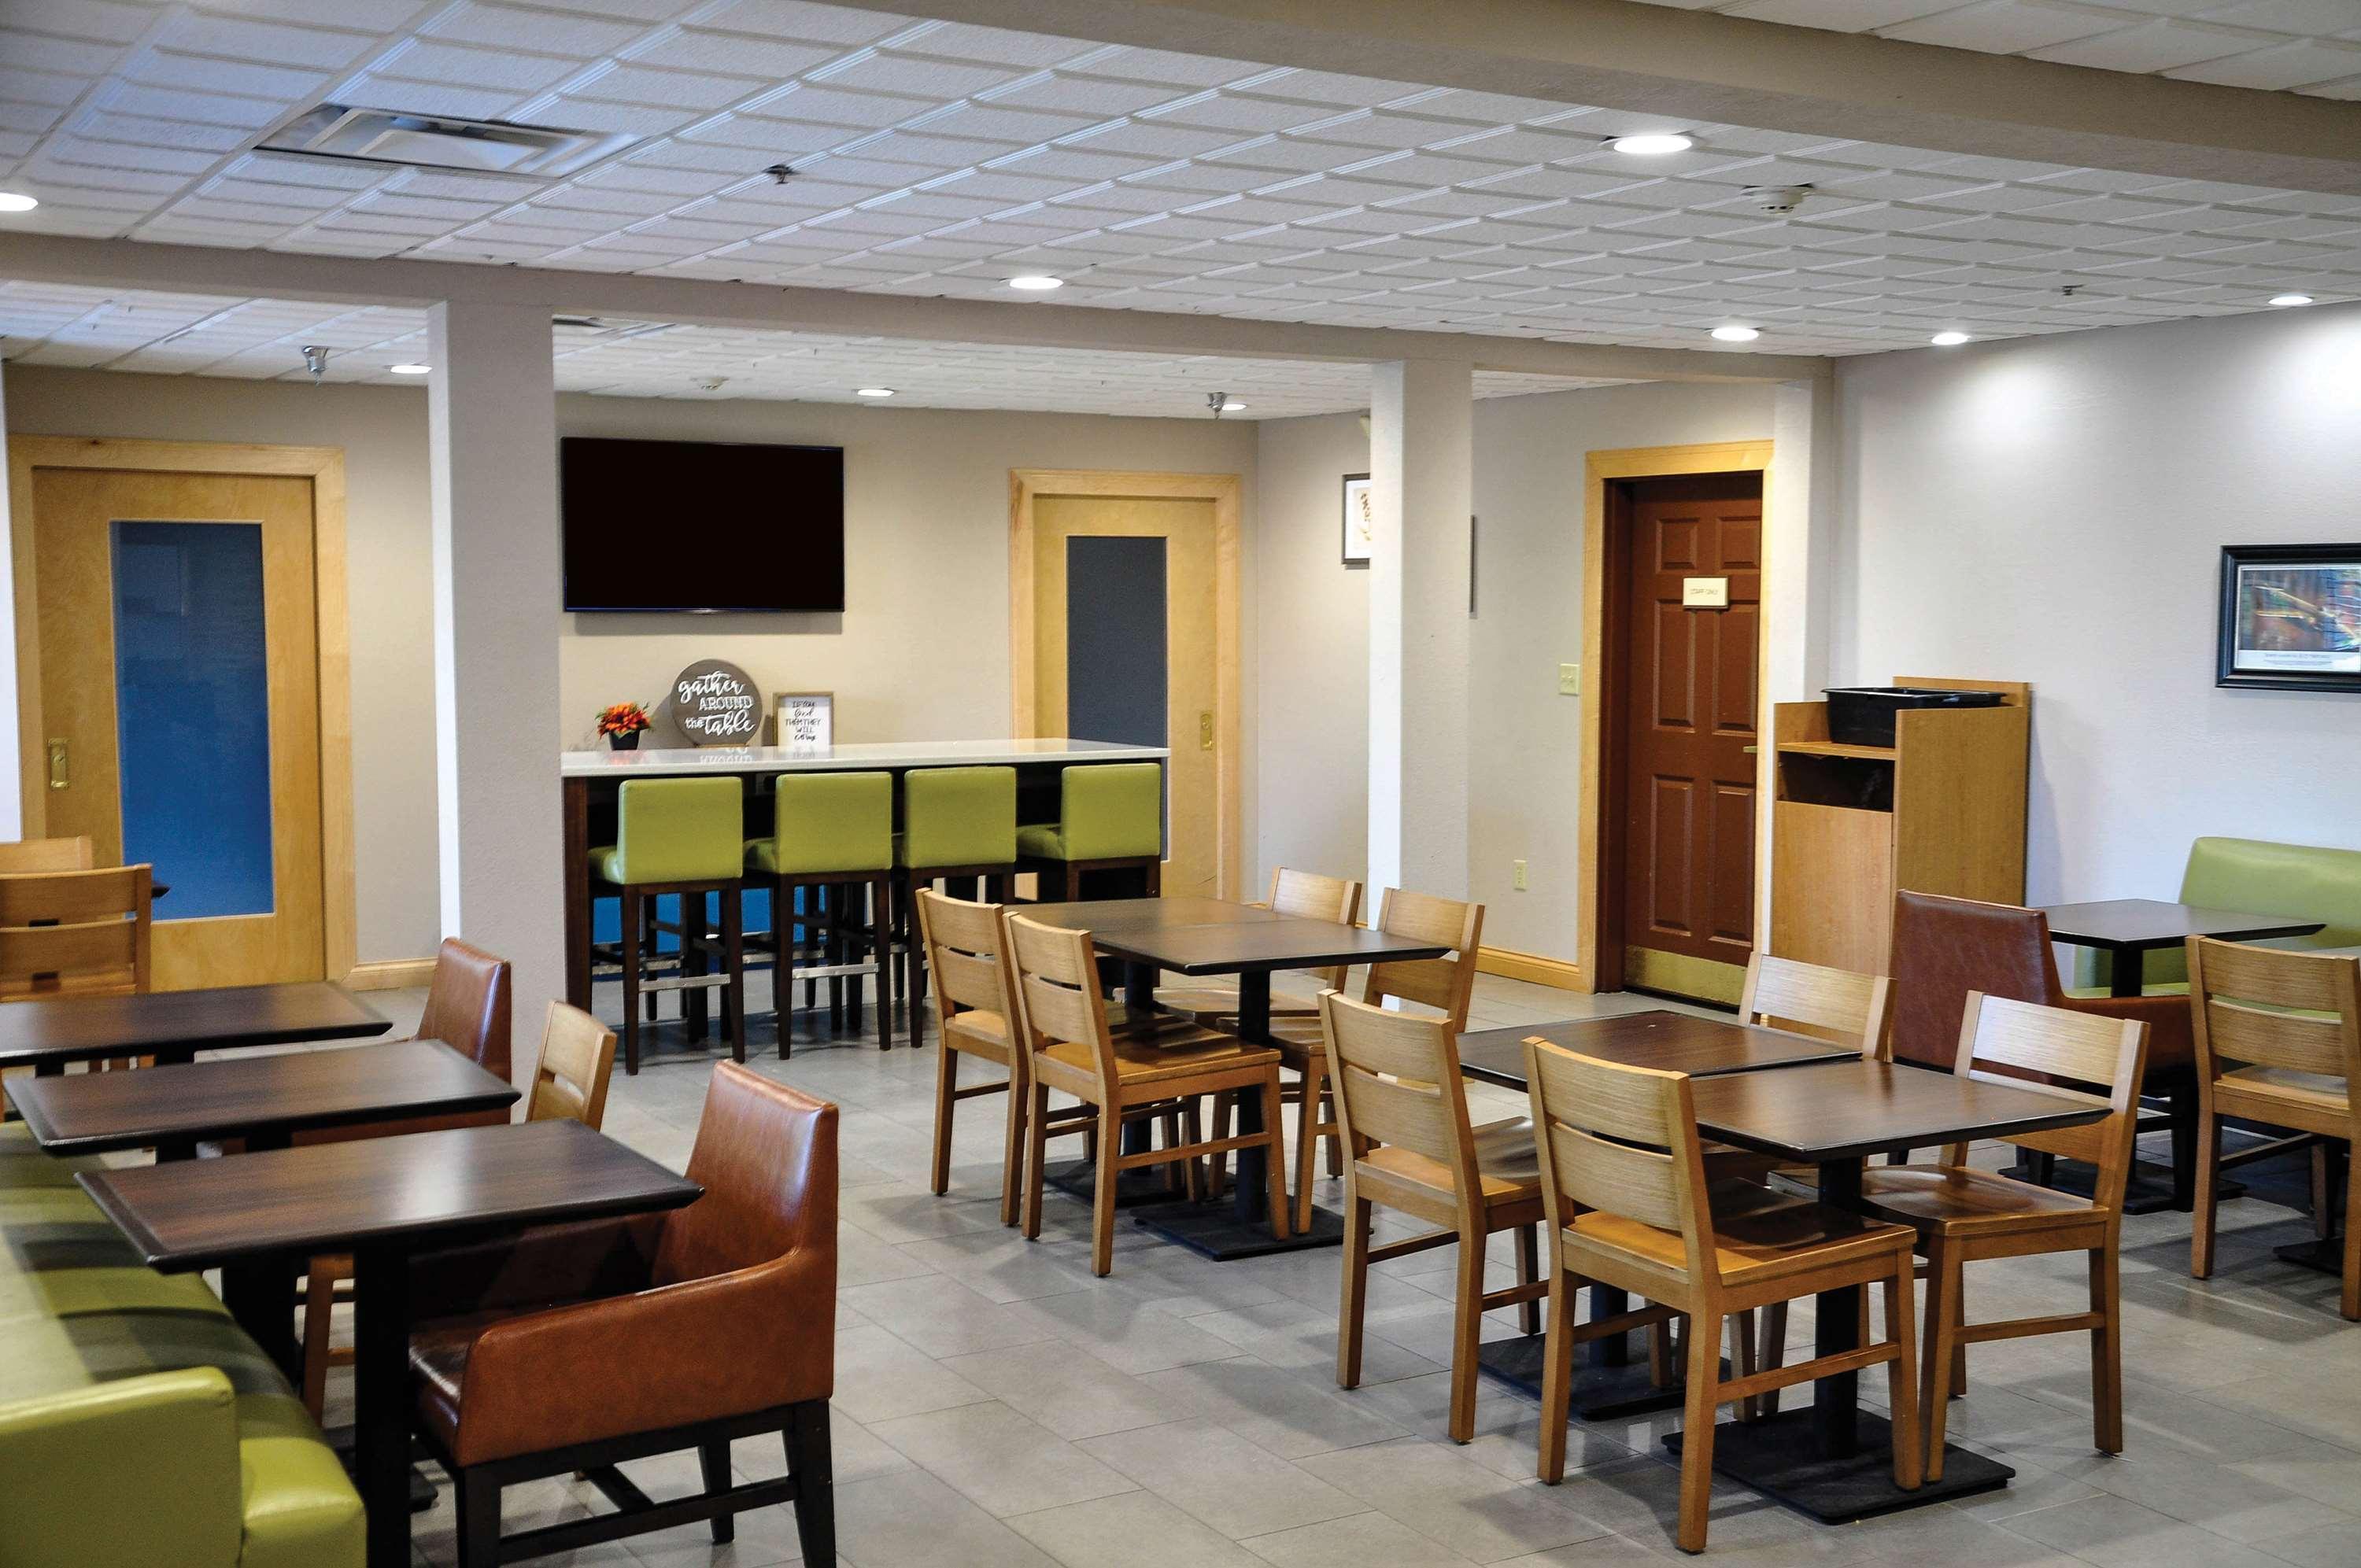 Country Inn & Suites By Radisson, Fairborn South, Oh ภายนอก รูปภาพ